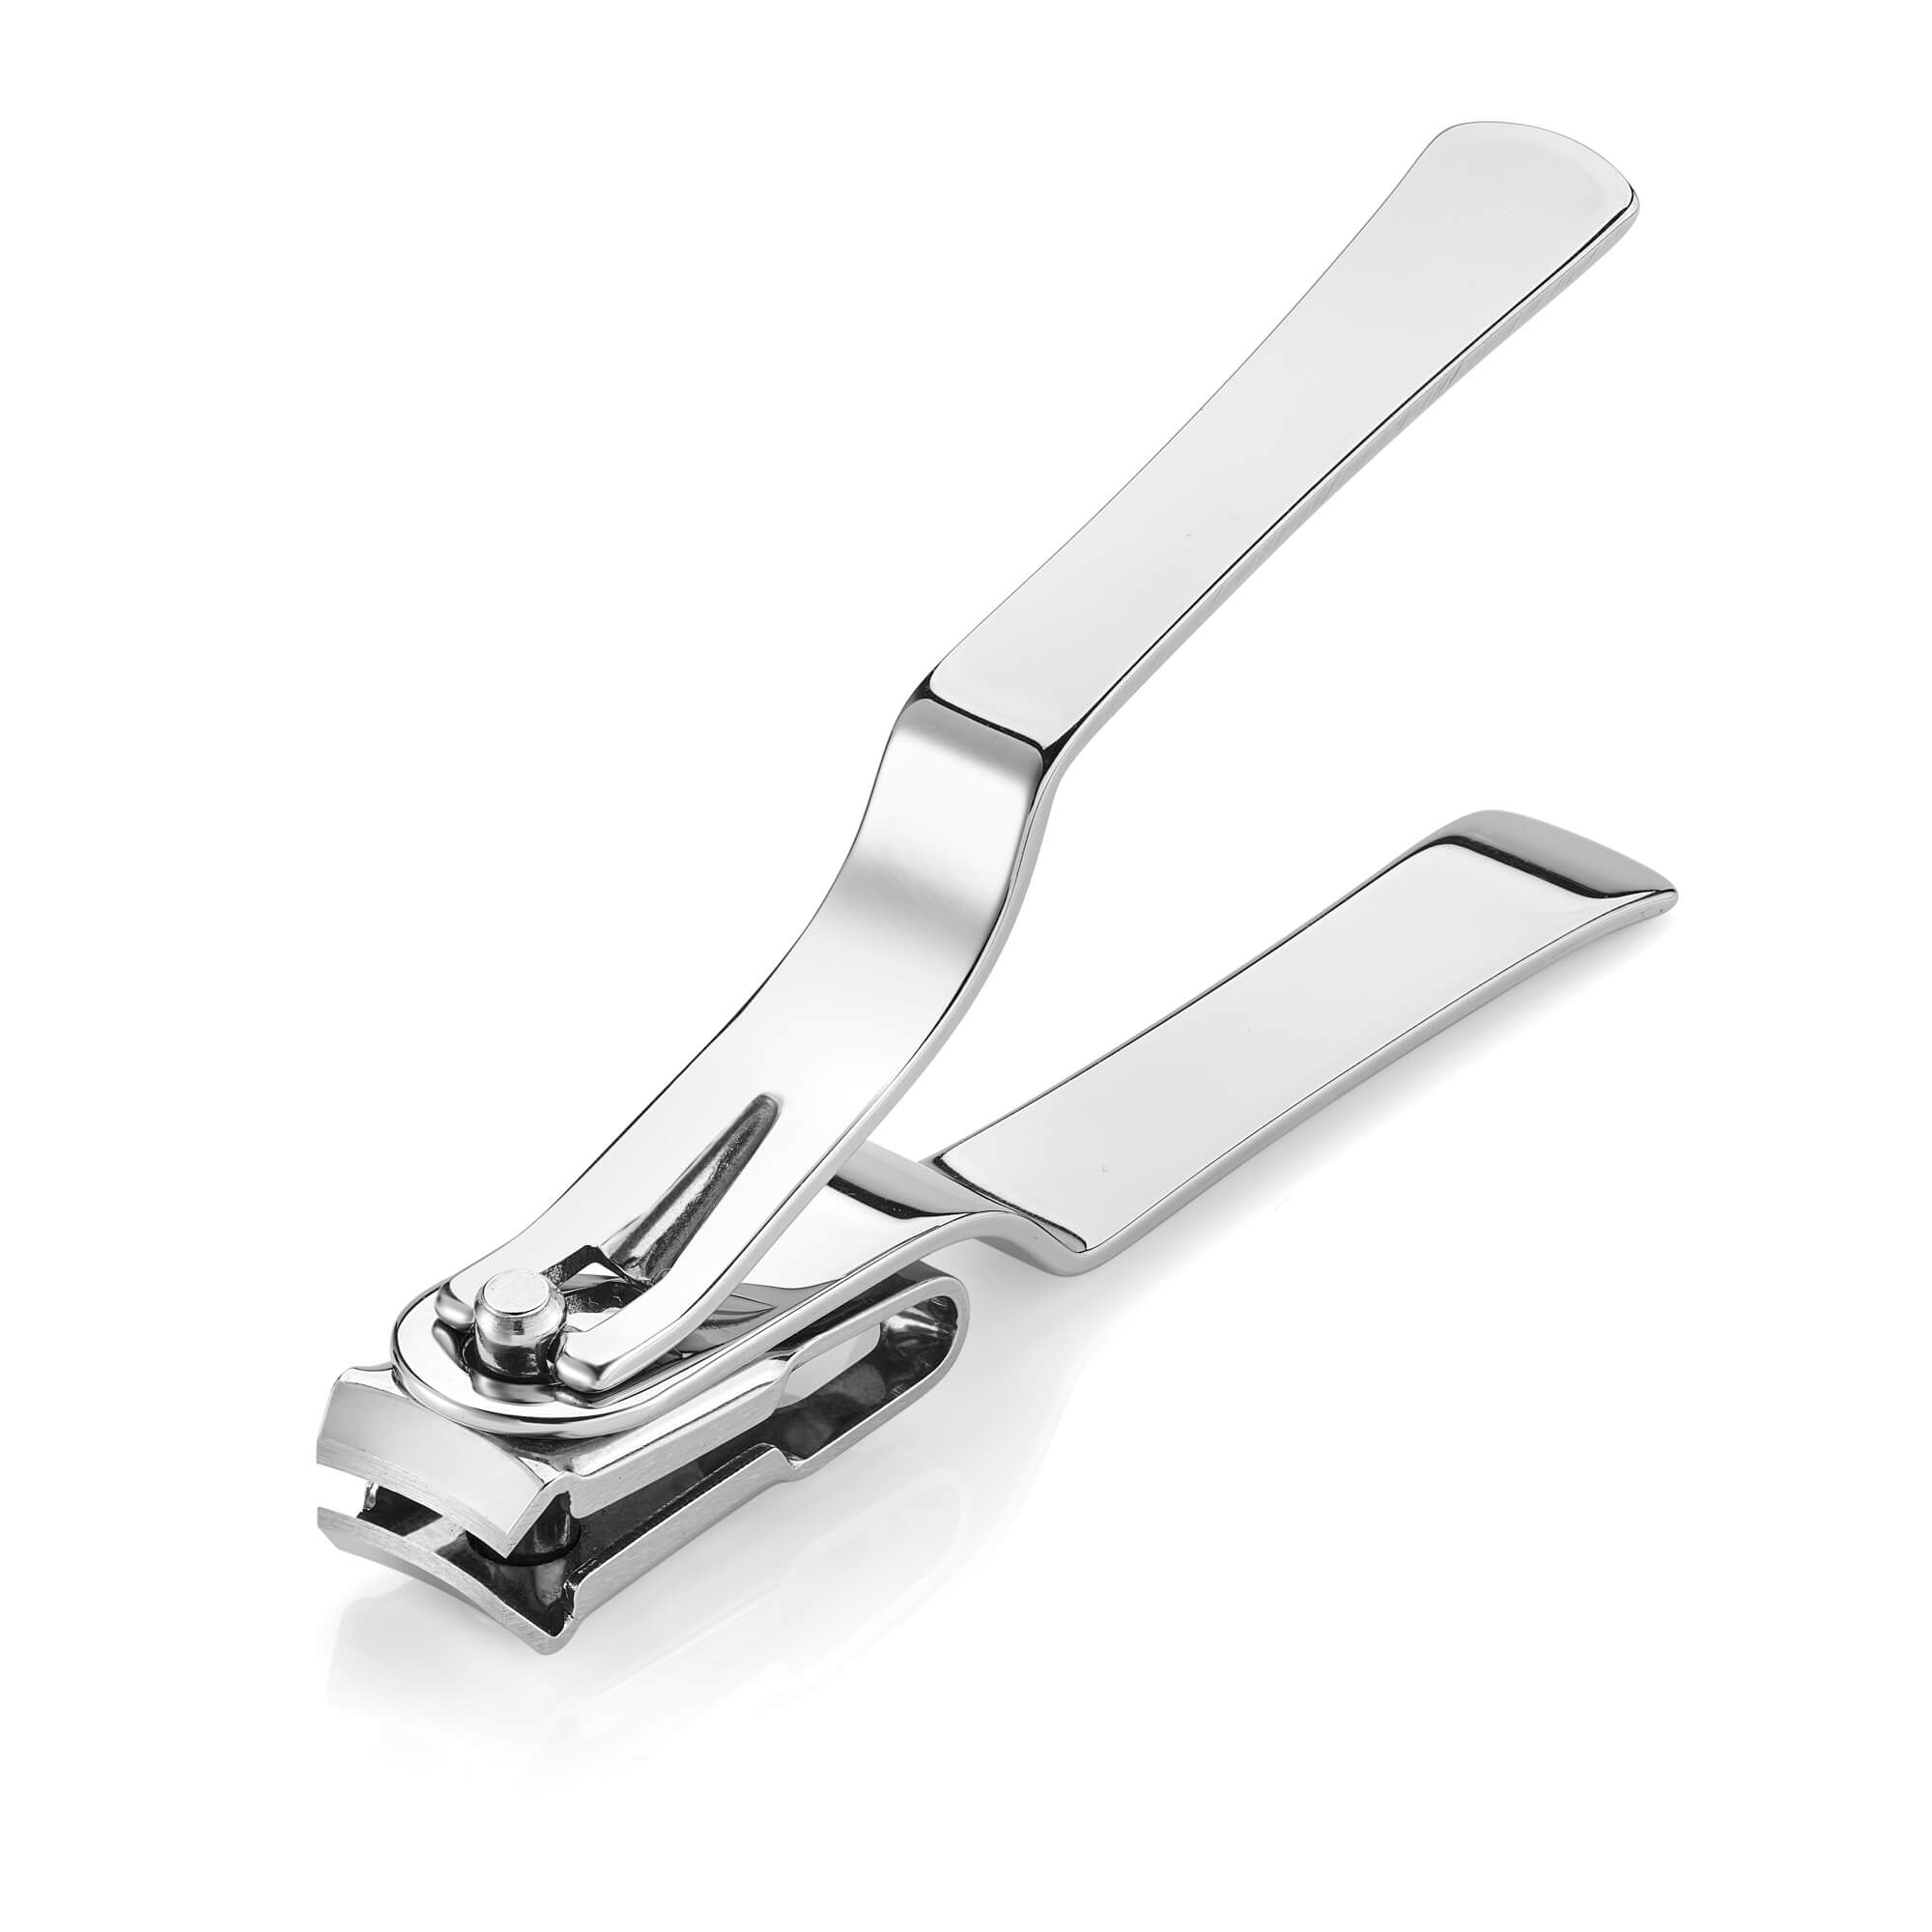 Swissklip Nail Clippers for Men I Well Suited as Finger Nail